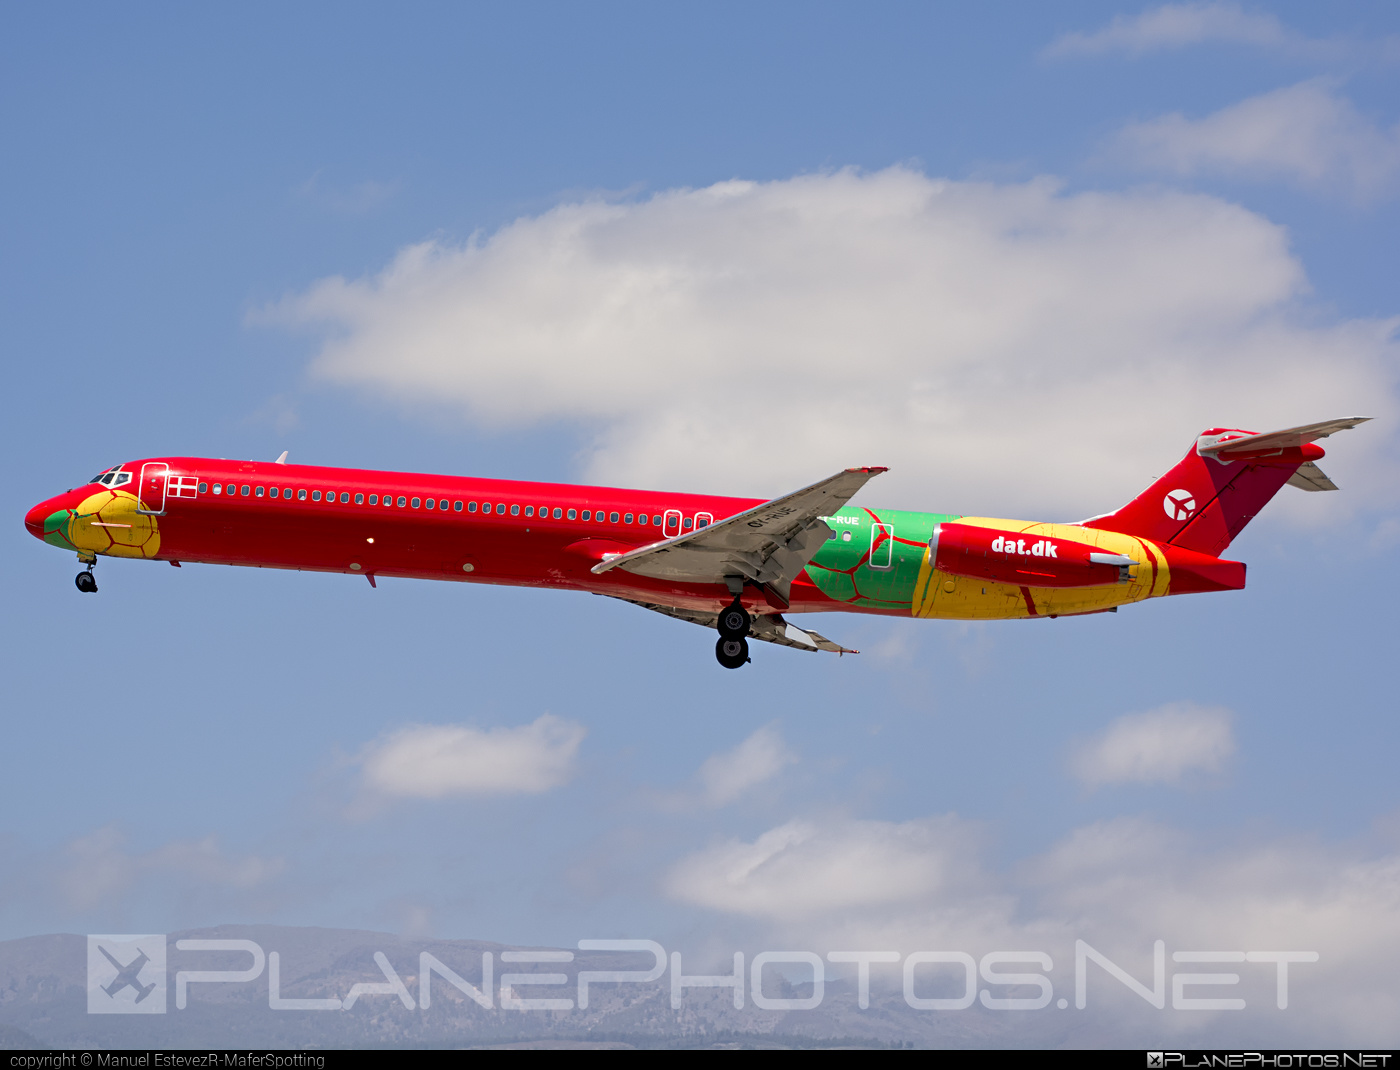 McDonnell Douglas MD-83 - OY-RUE operated by Danish Air Transport (DAT) #mcDonnellDouglas #mcdonnelldouglas80 #mcdonnelldouglas83 #mcdonnelldouglasmd80 #mcdonnelldouglasmd83 #md80 #md83